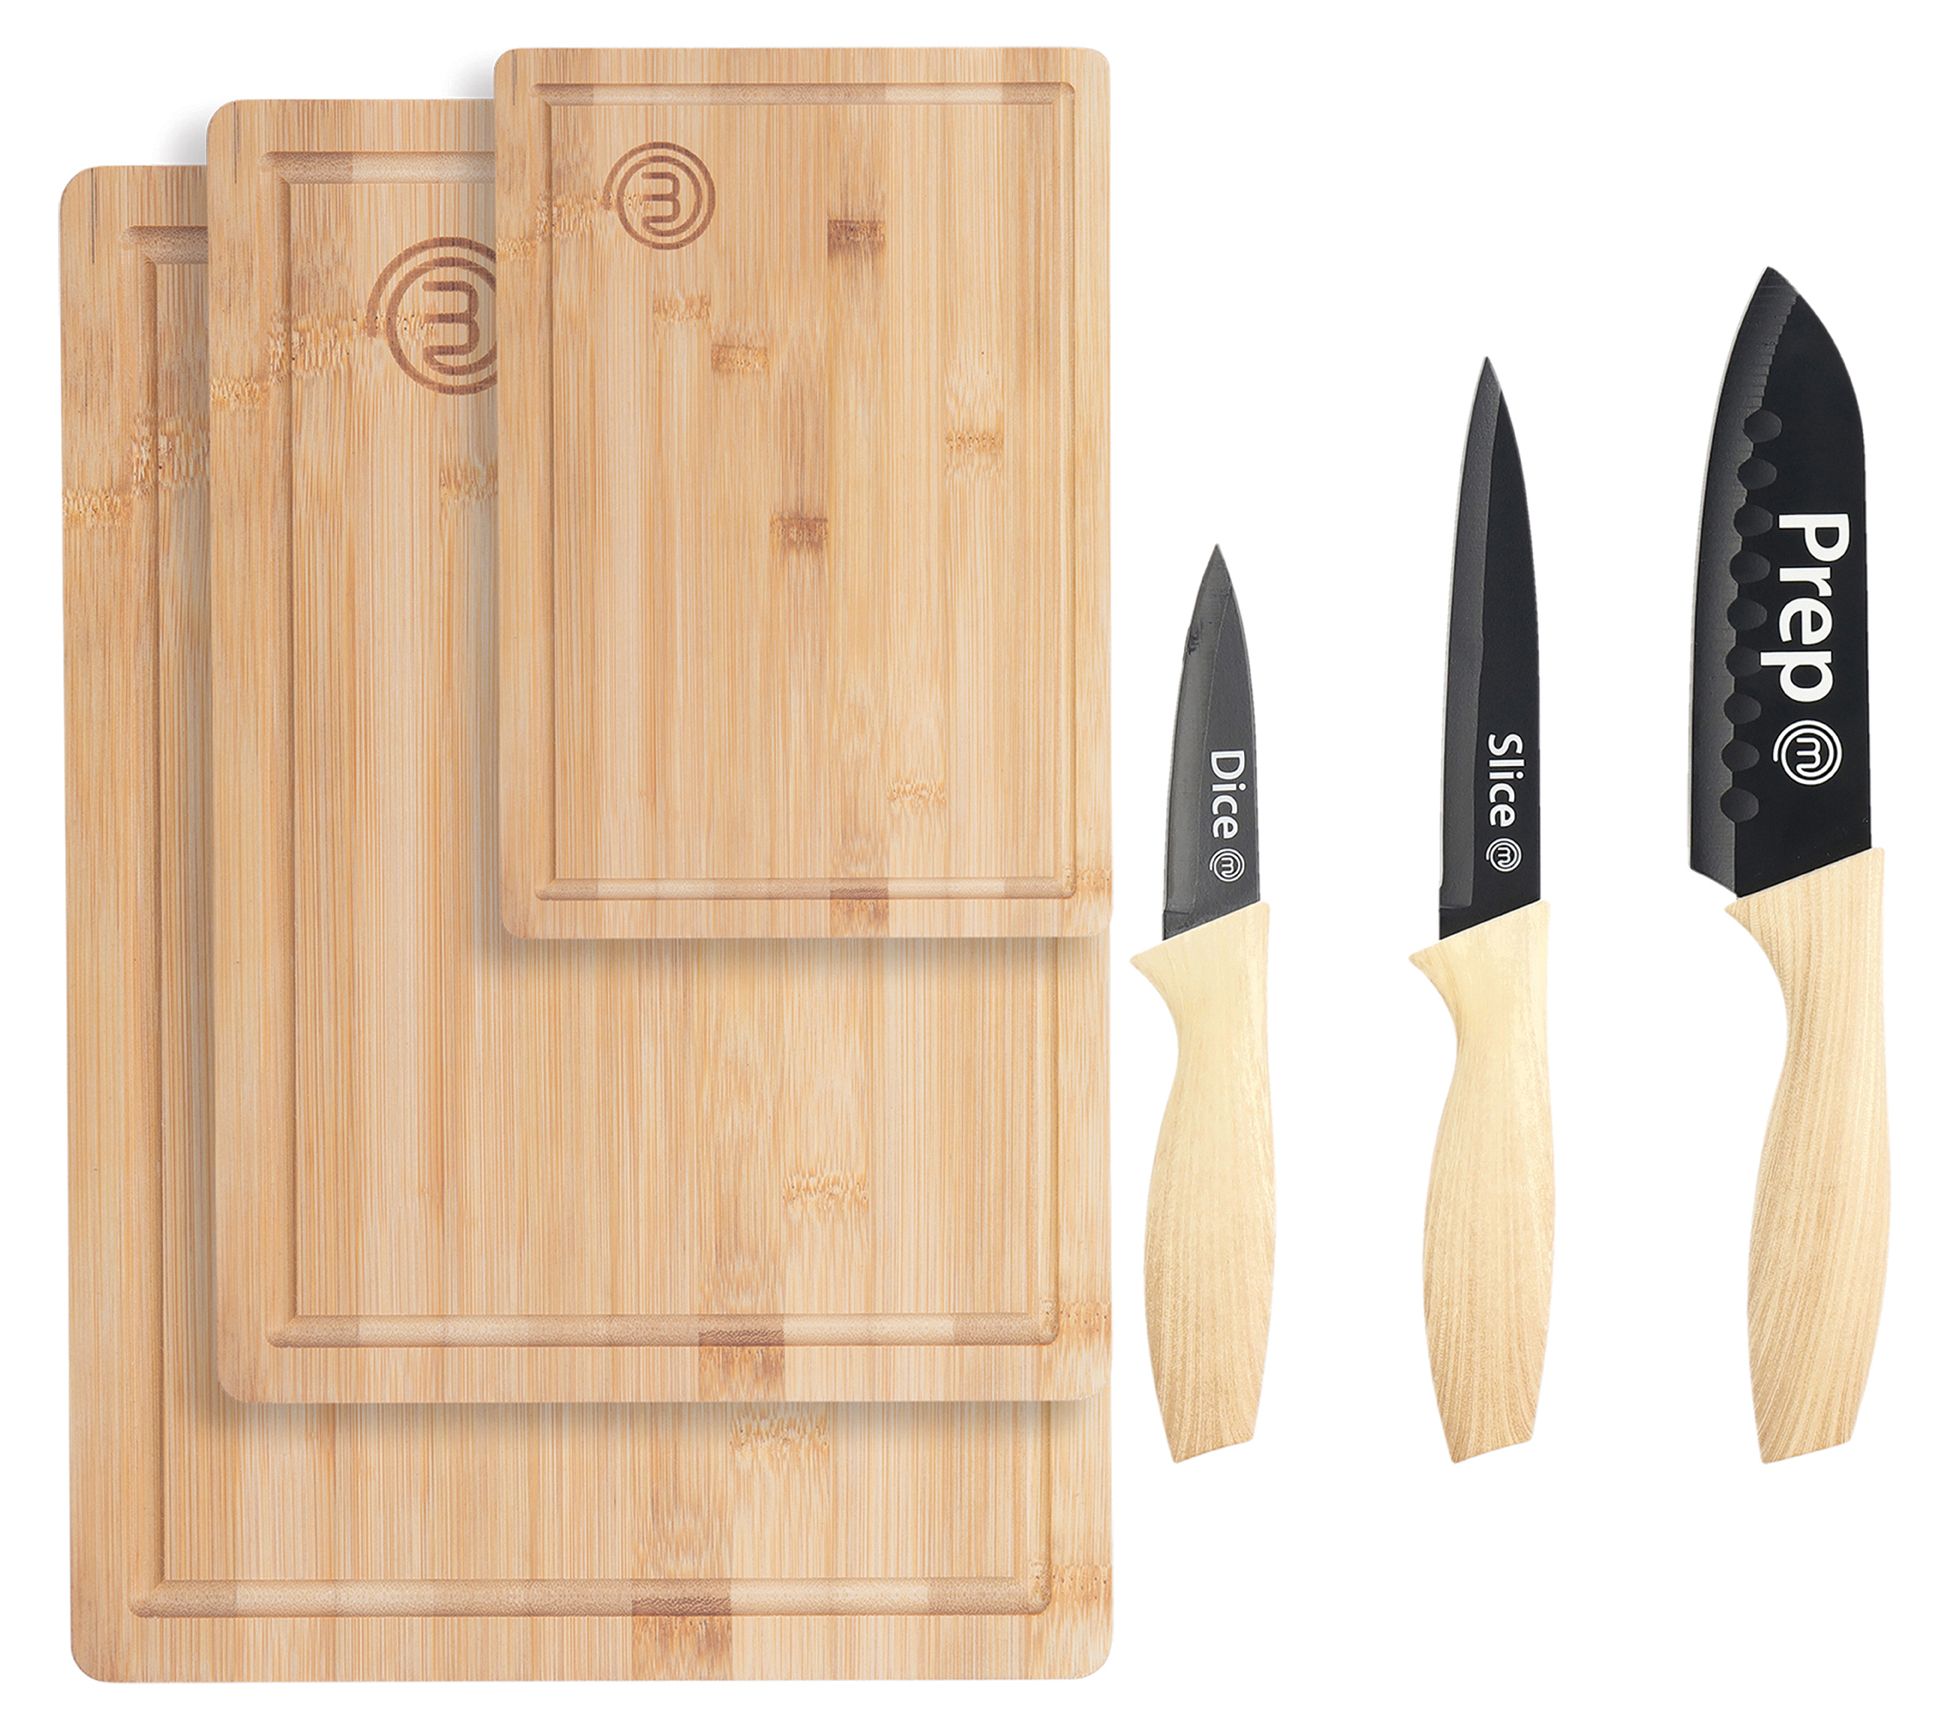 Masterchef 15 Piece Knife & Board Set, 6 Knives with Sleeves and 3 Boards